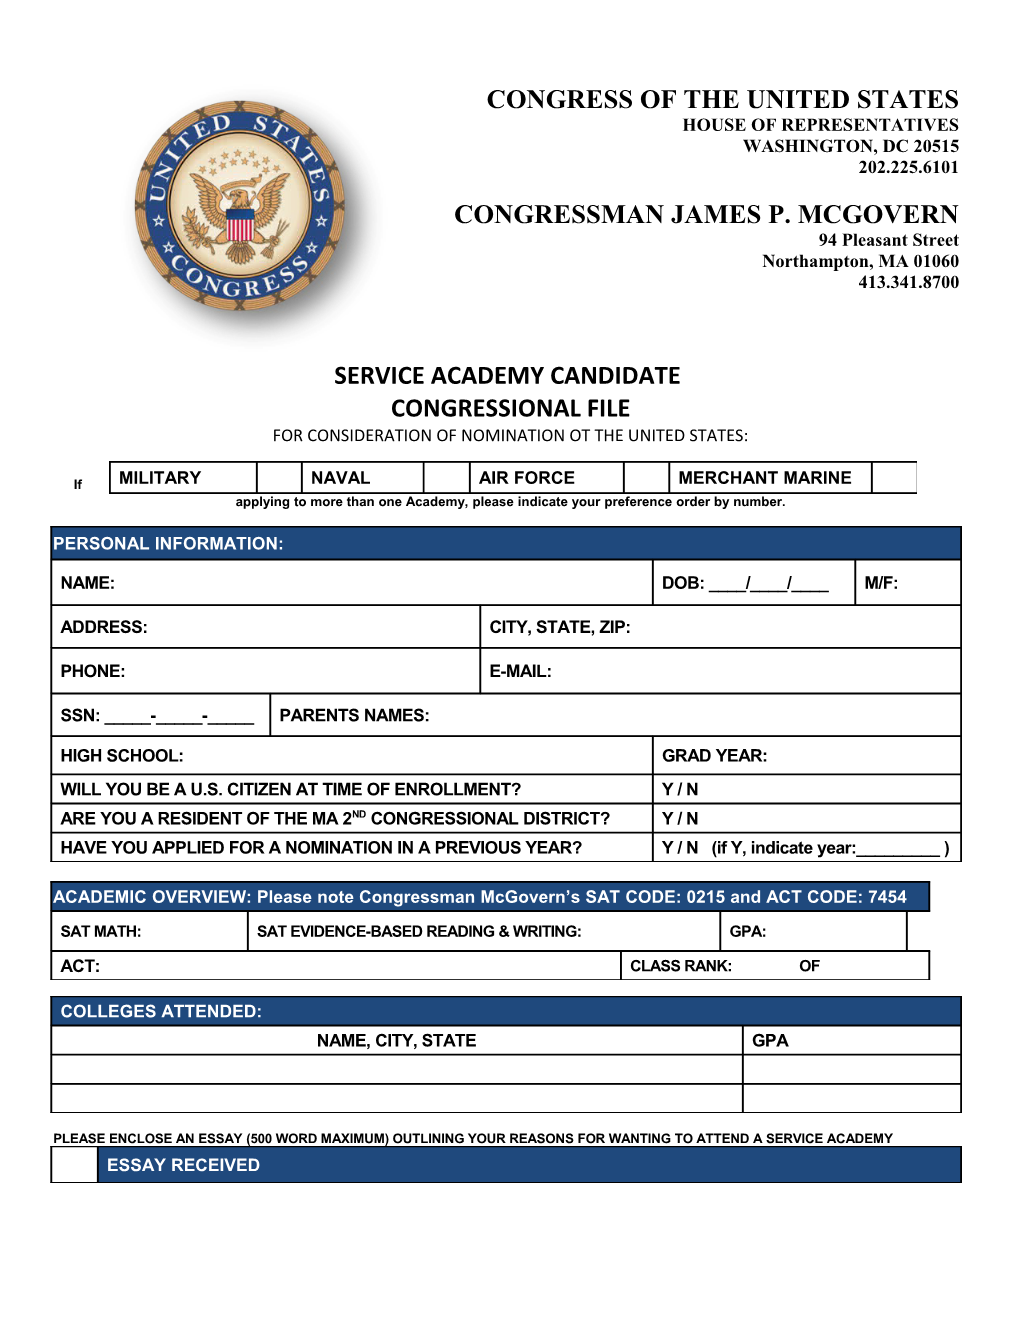 SERVICE ACADEMY CANDIDATE FILE of NAME: Page 1 of 5